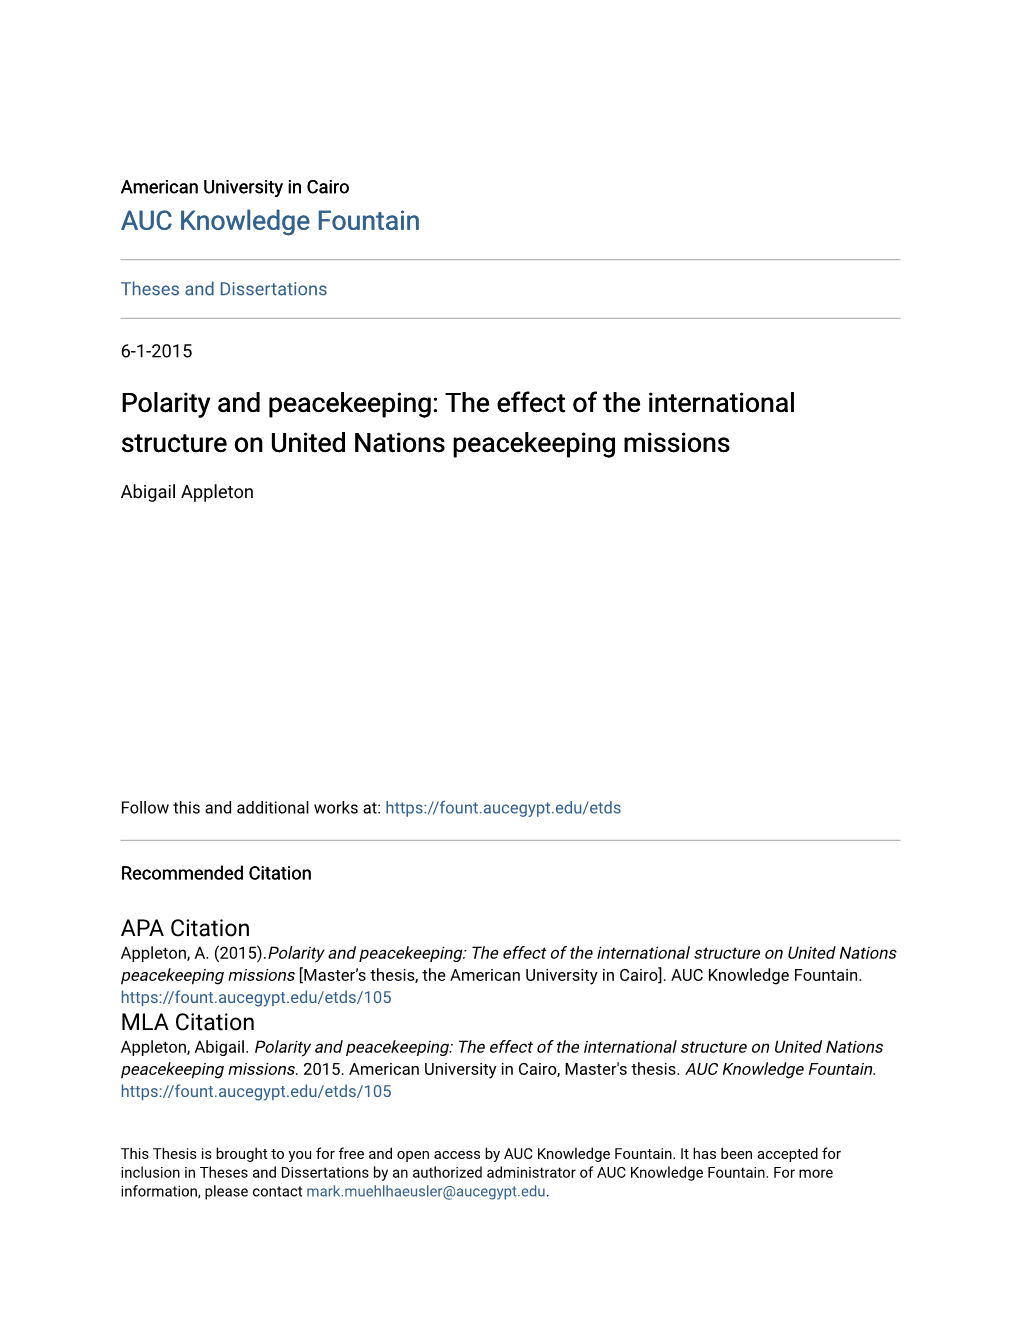 The Effect of the International Structure on United Nations Peacekeeping Missions